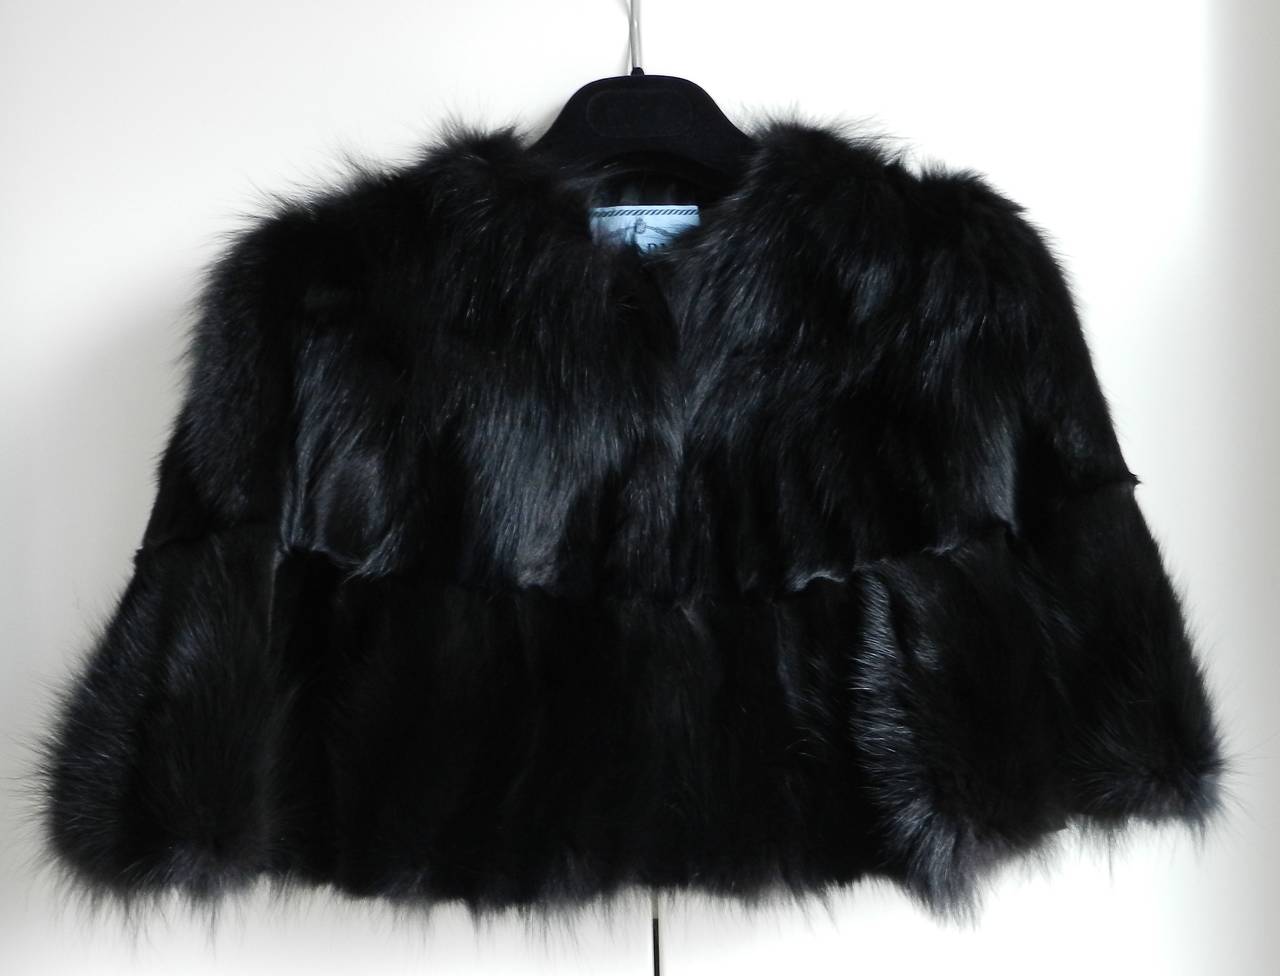 Prada black fox fur stole / capelet. Excellent condition. Fastens at front with hook and eye closures. Back neck to hem is 15